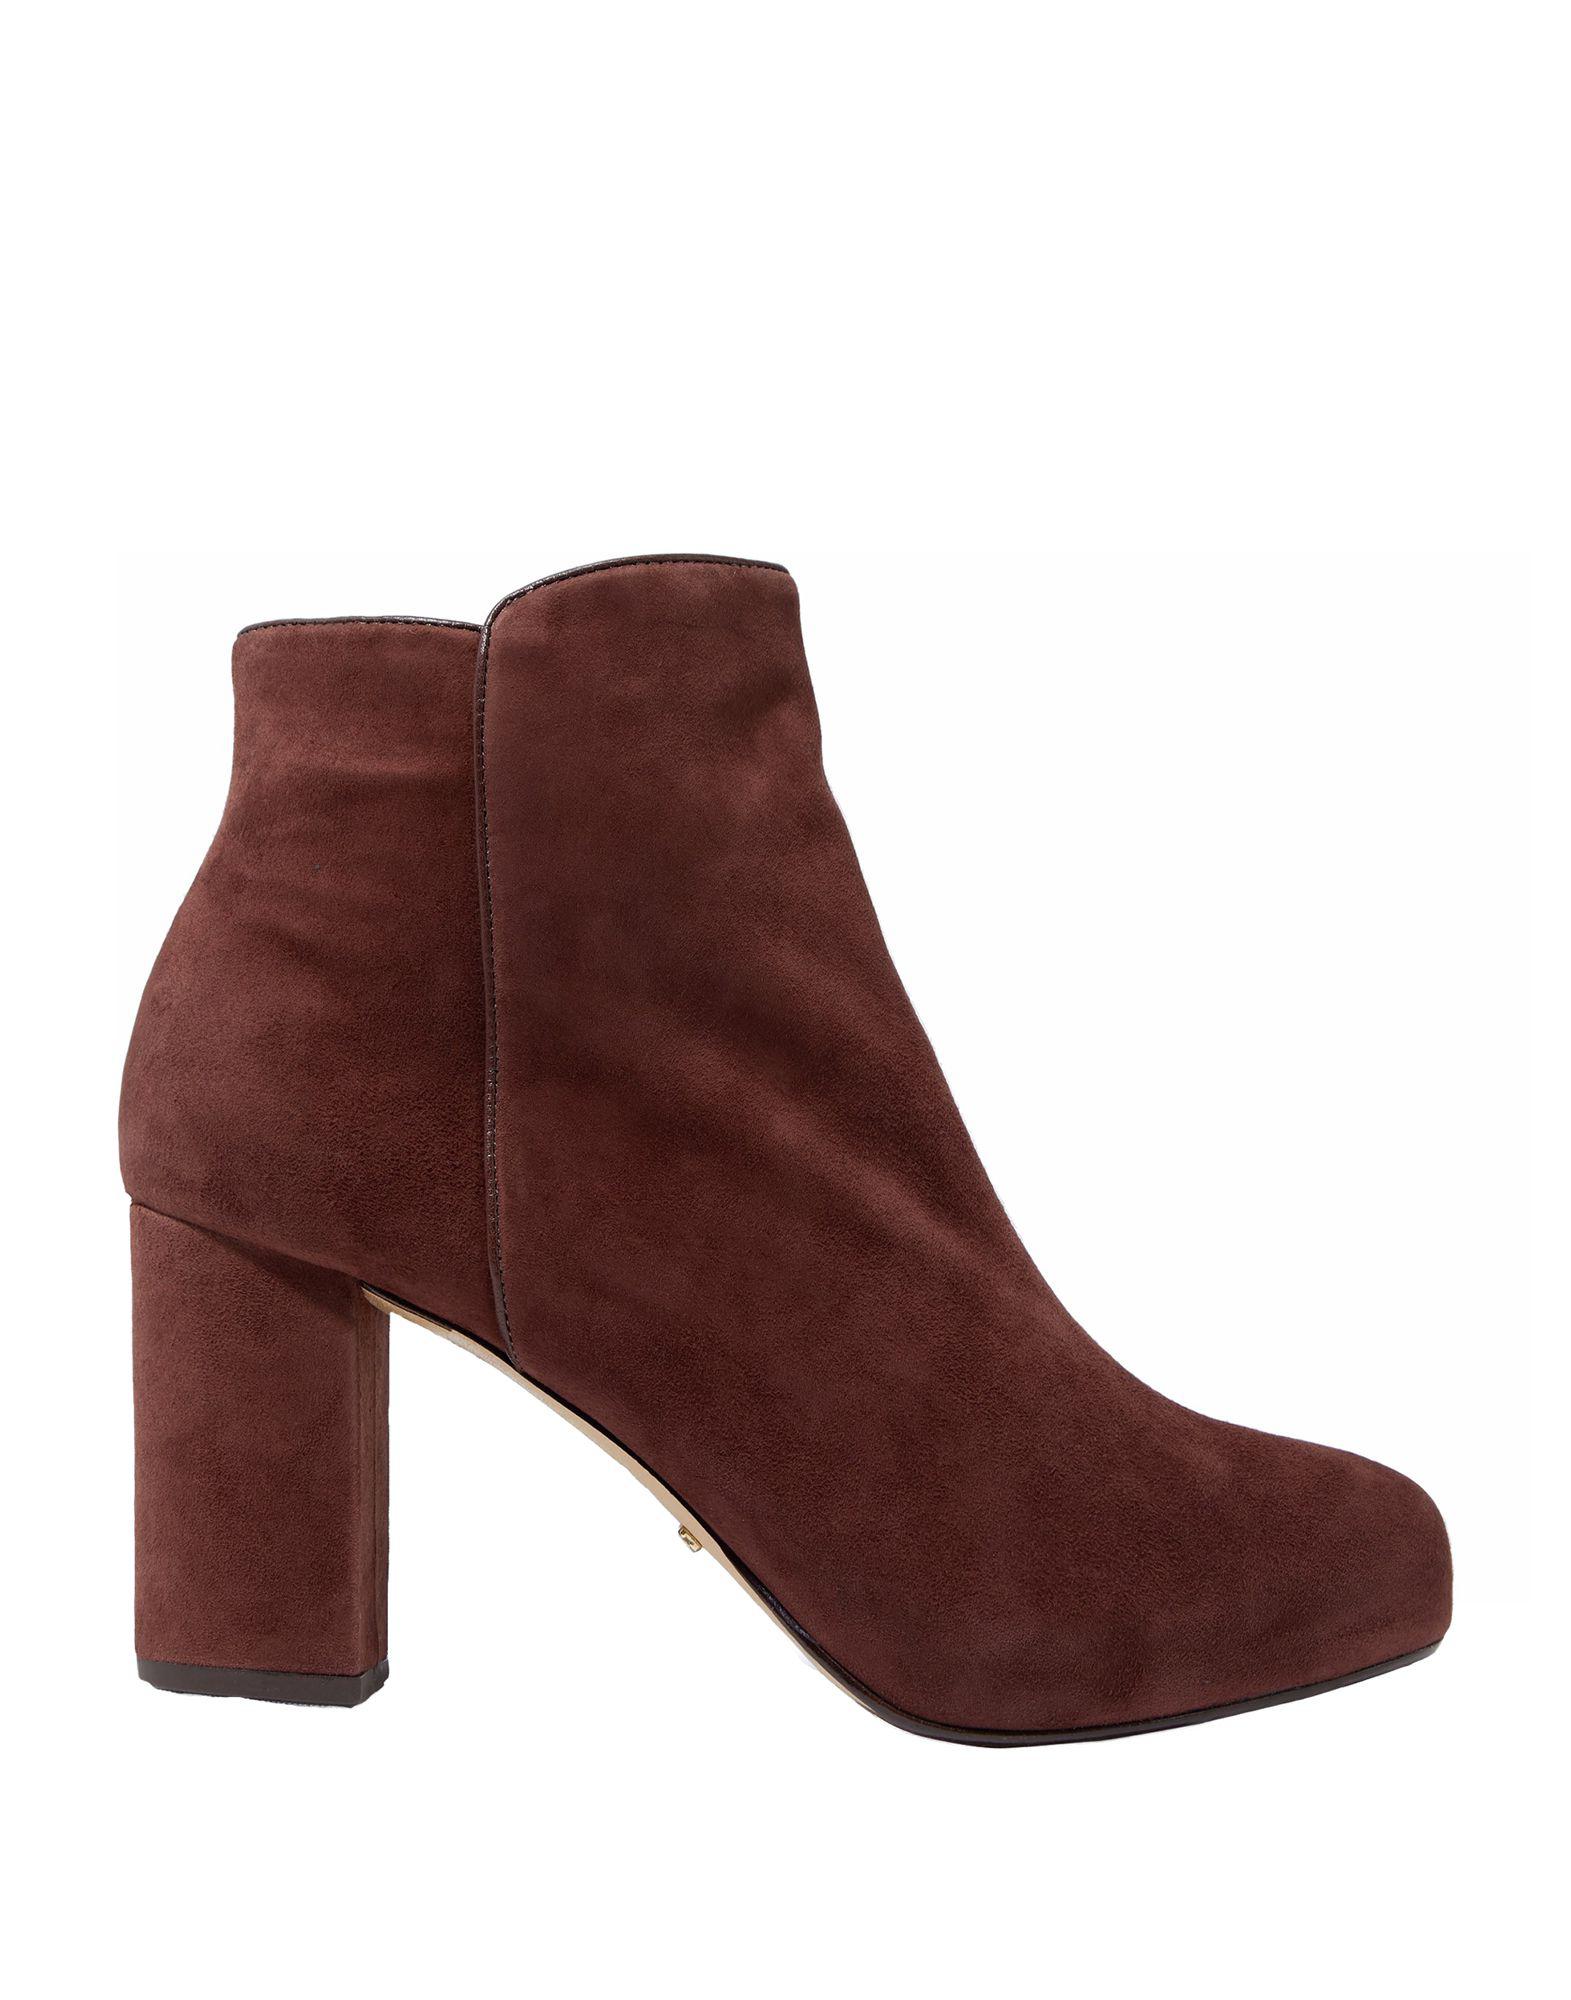 Schutz Suede Ankle Boots in Chocolate (Brown) - Save 30% - Lyst